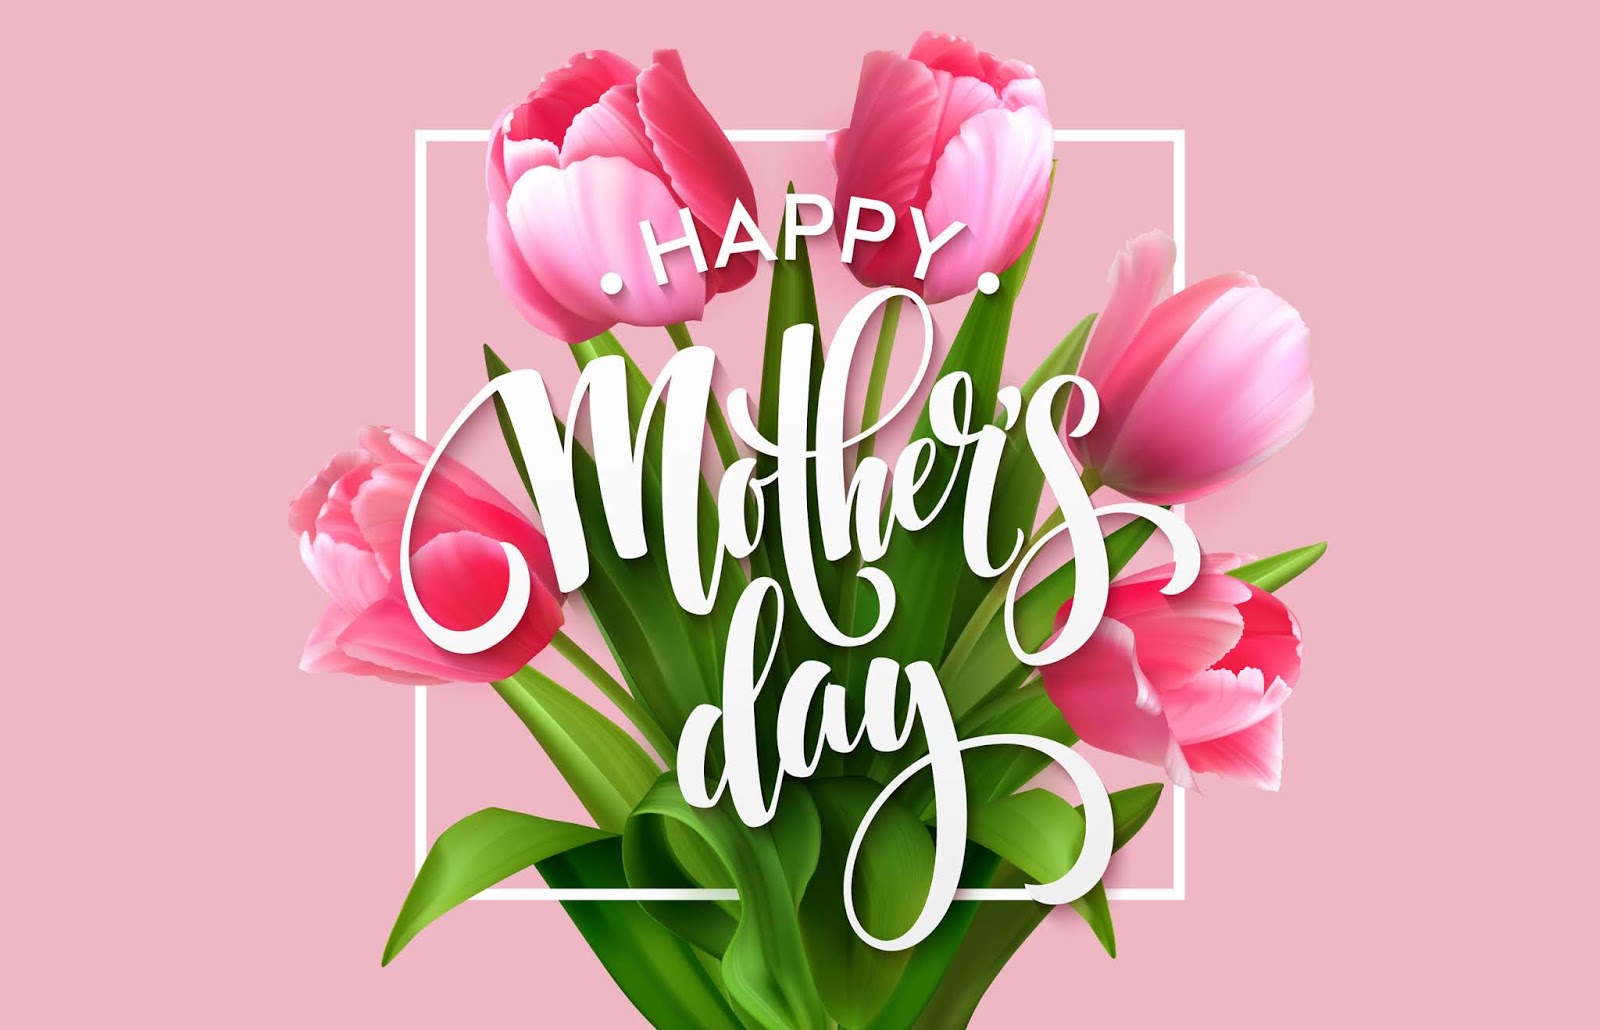 Happy Mothers Day 2020 Wishes, Messages and Quotes